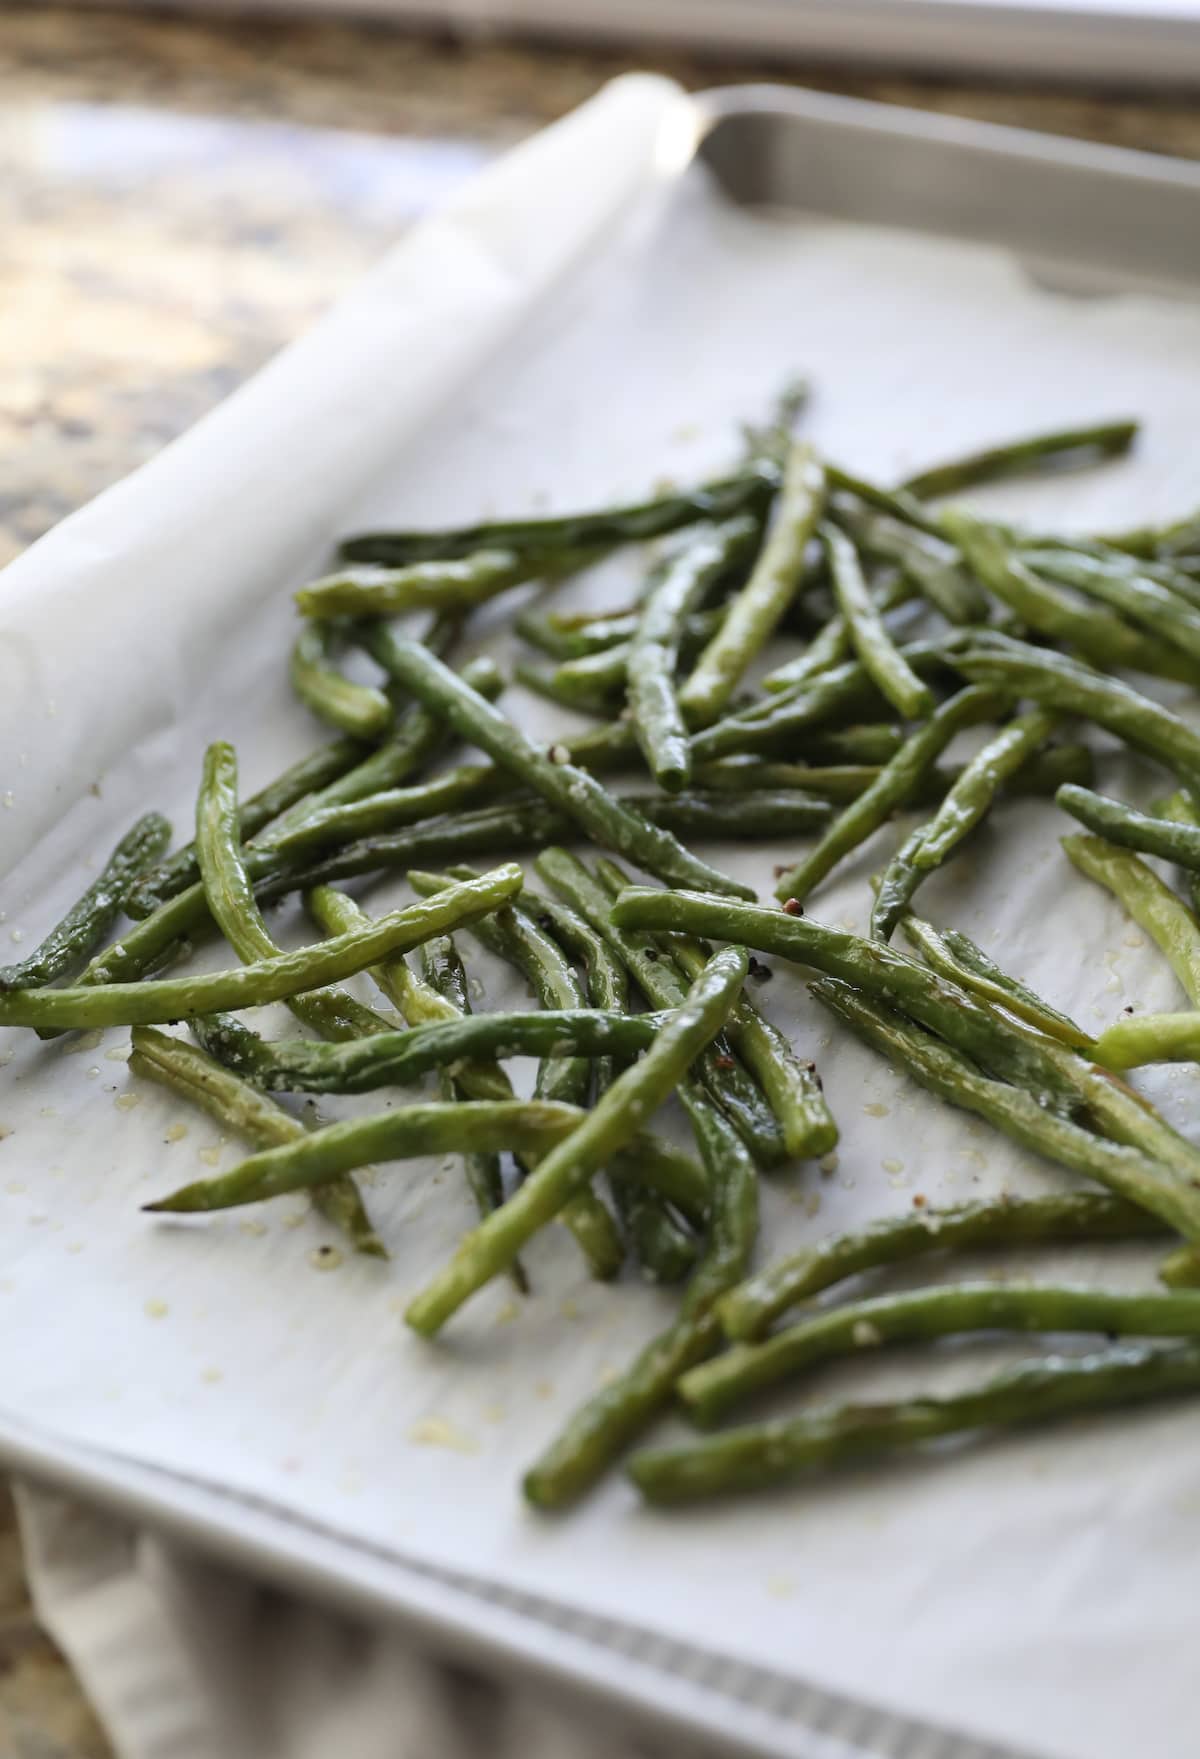 roasted green beans on baking tray